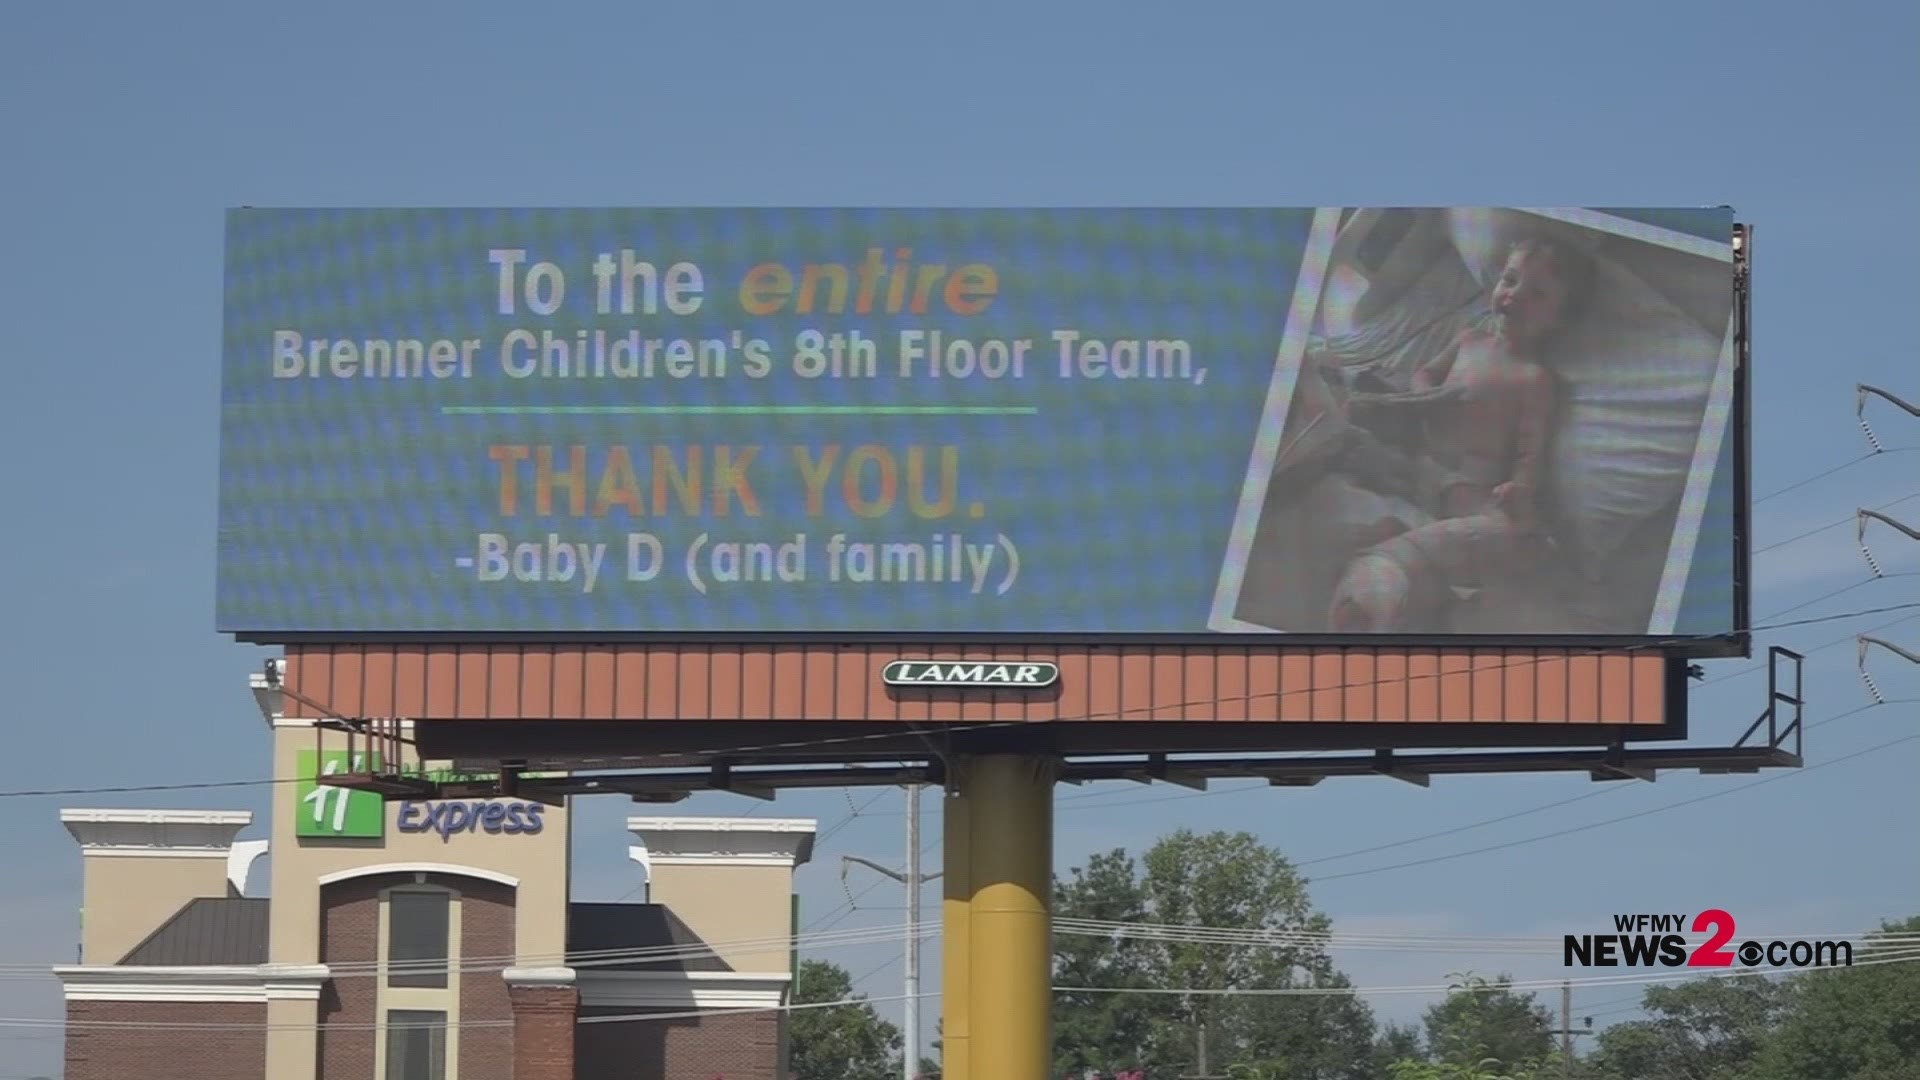 One family gave a BIG thank you to the team at Brenner Children's Hospital. In fact, it was on a billboard! It reads, "To the entire Brenner Children's 8th Floor Team, THANK YOU. - Baby D (and family)"